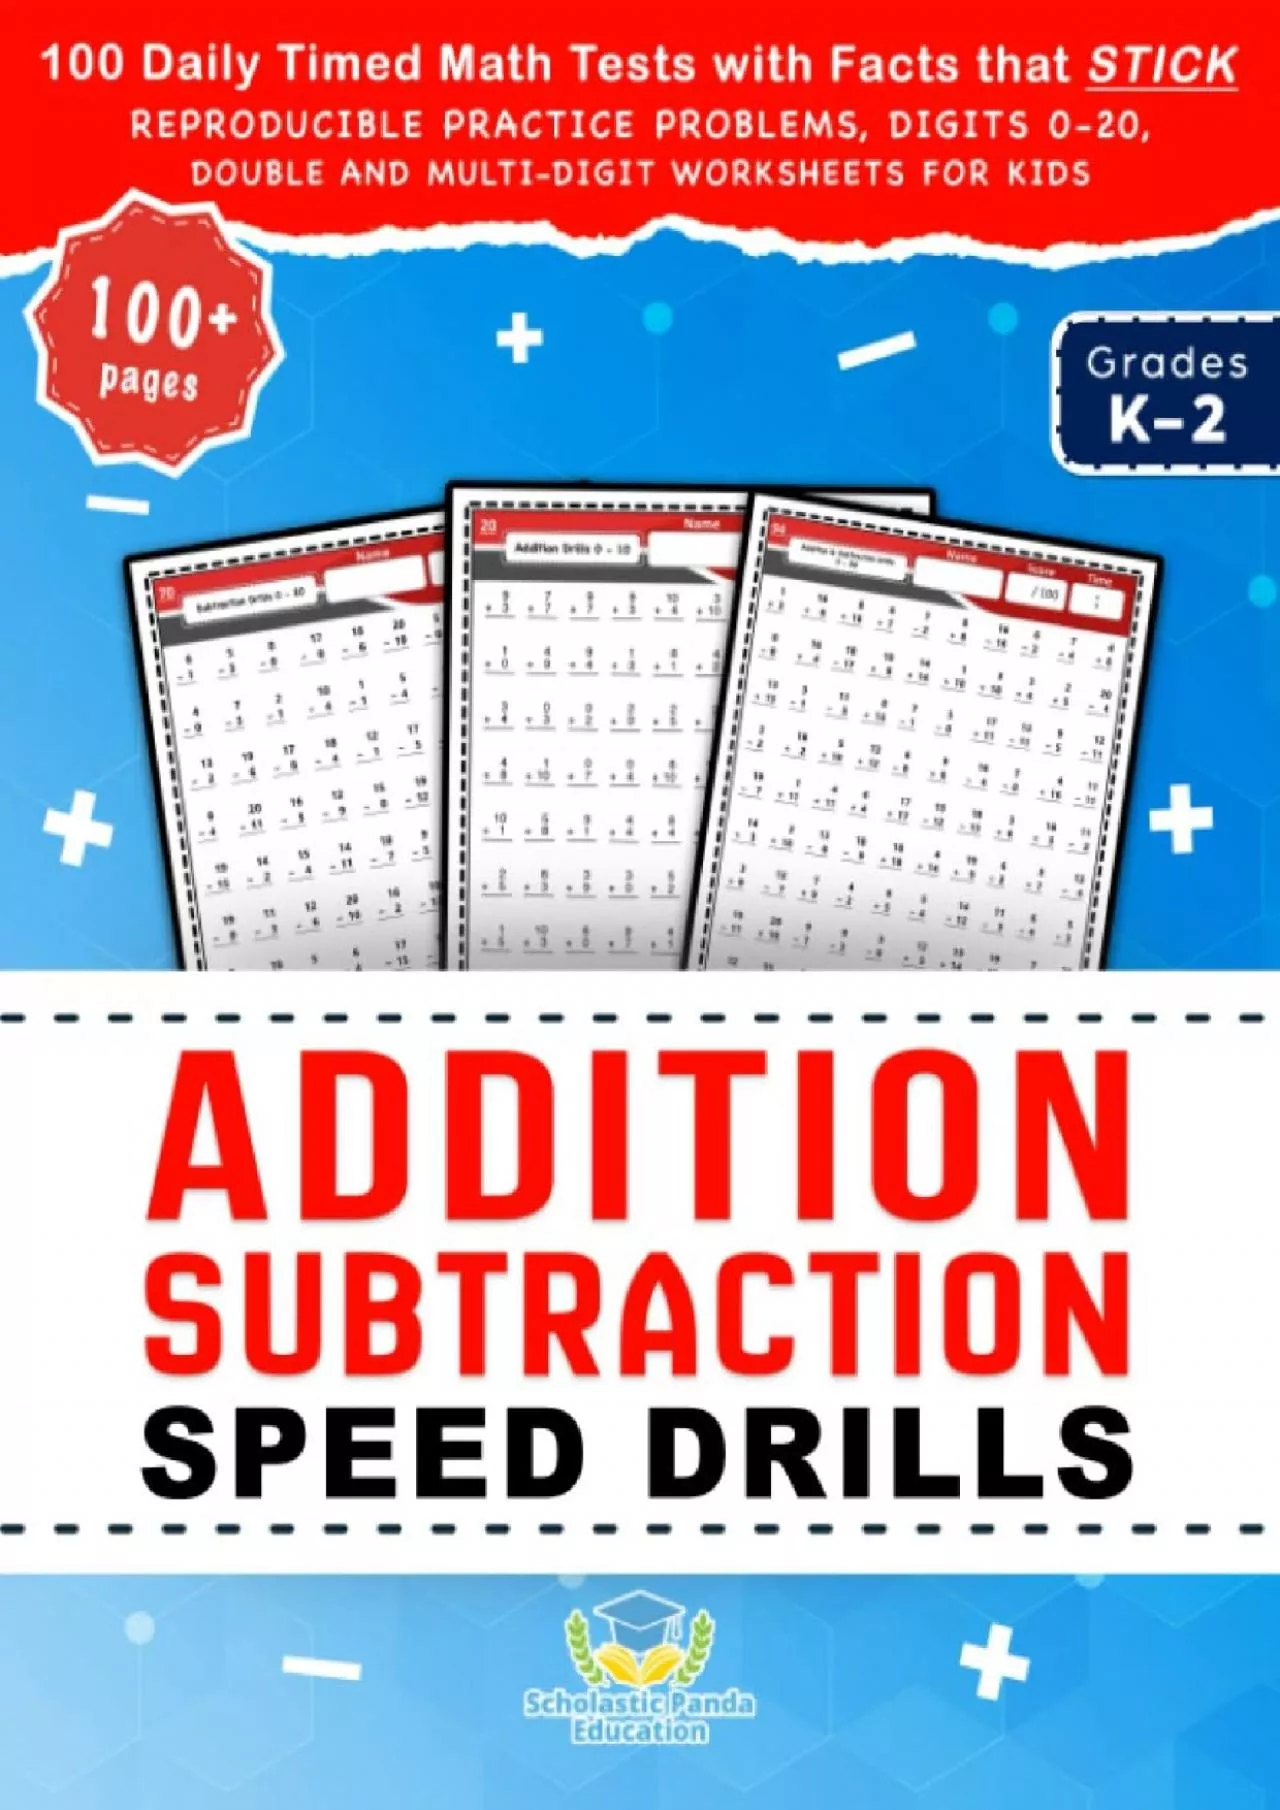 [READ] Addition Subtraction Speed Drills: 100 Daily Timed Math Tests with Facts that Stick